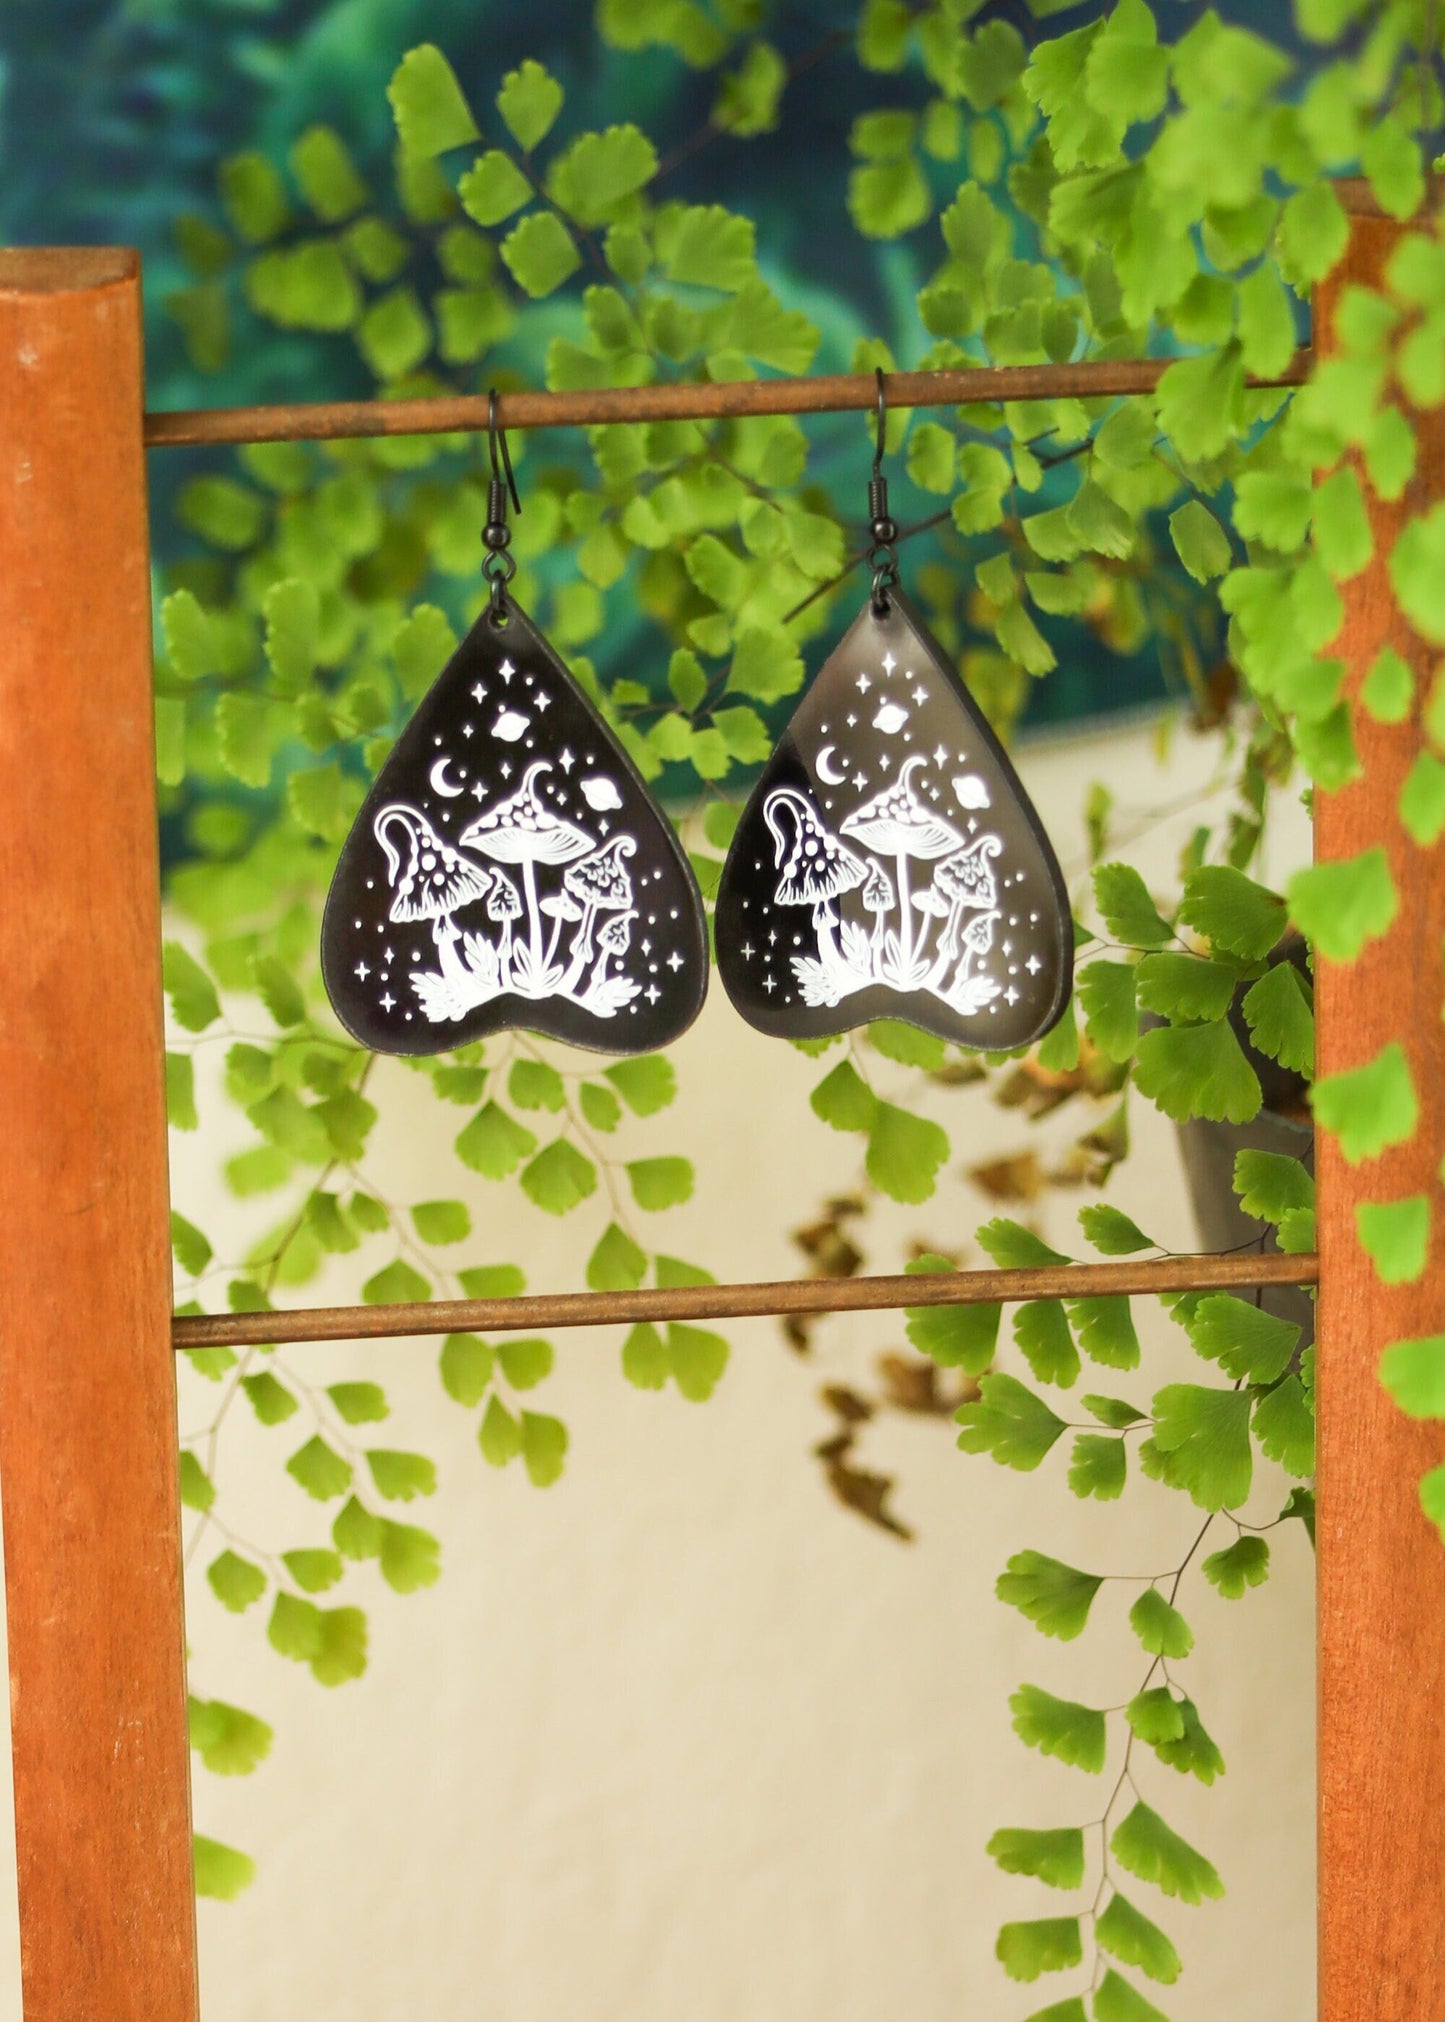 Black Acrylic Earrings | Trippy Celestial Mushroom Jewelry | Witch Goth Psychedelic Fantasy Charm | Whimsical Mystical Planchette Dangles